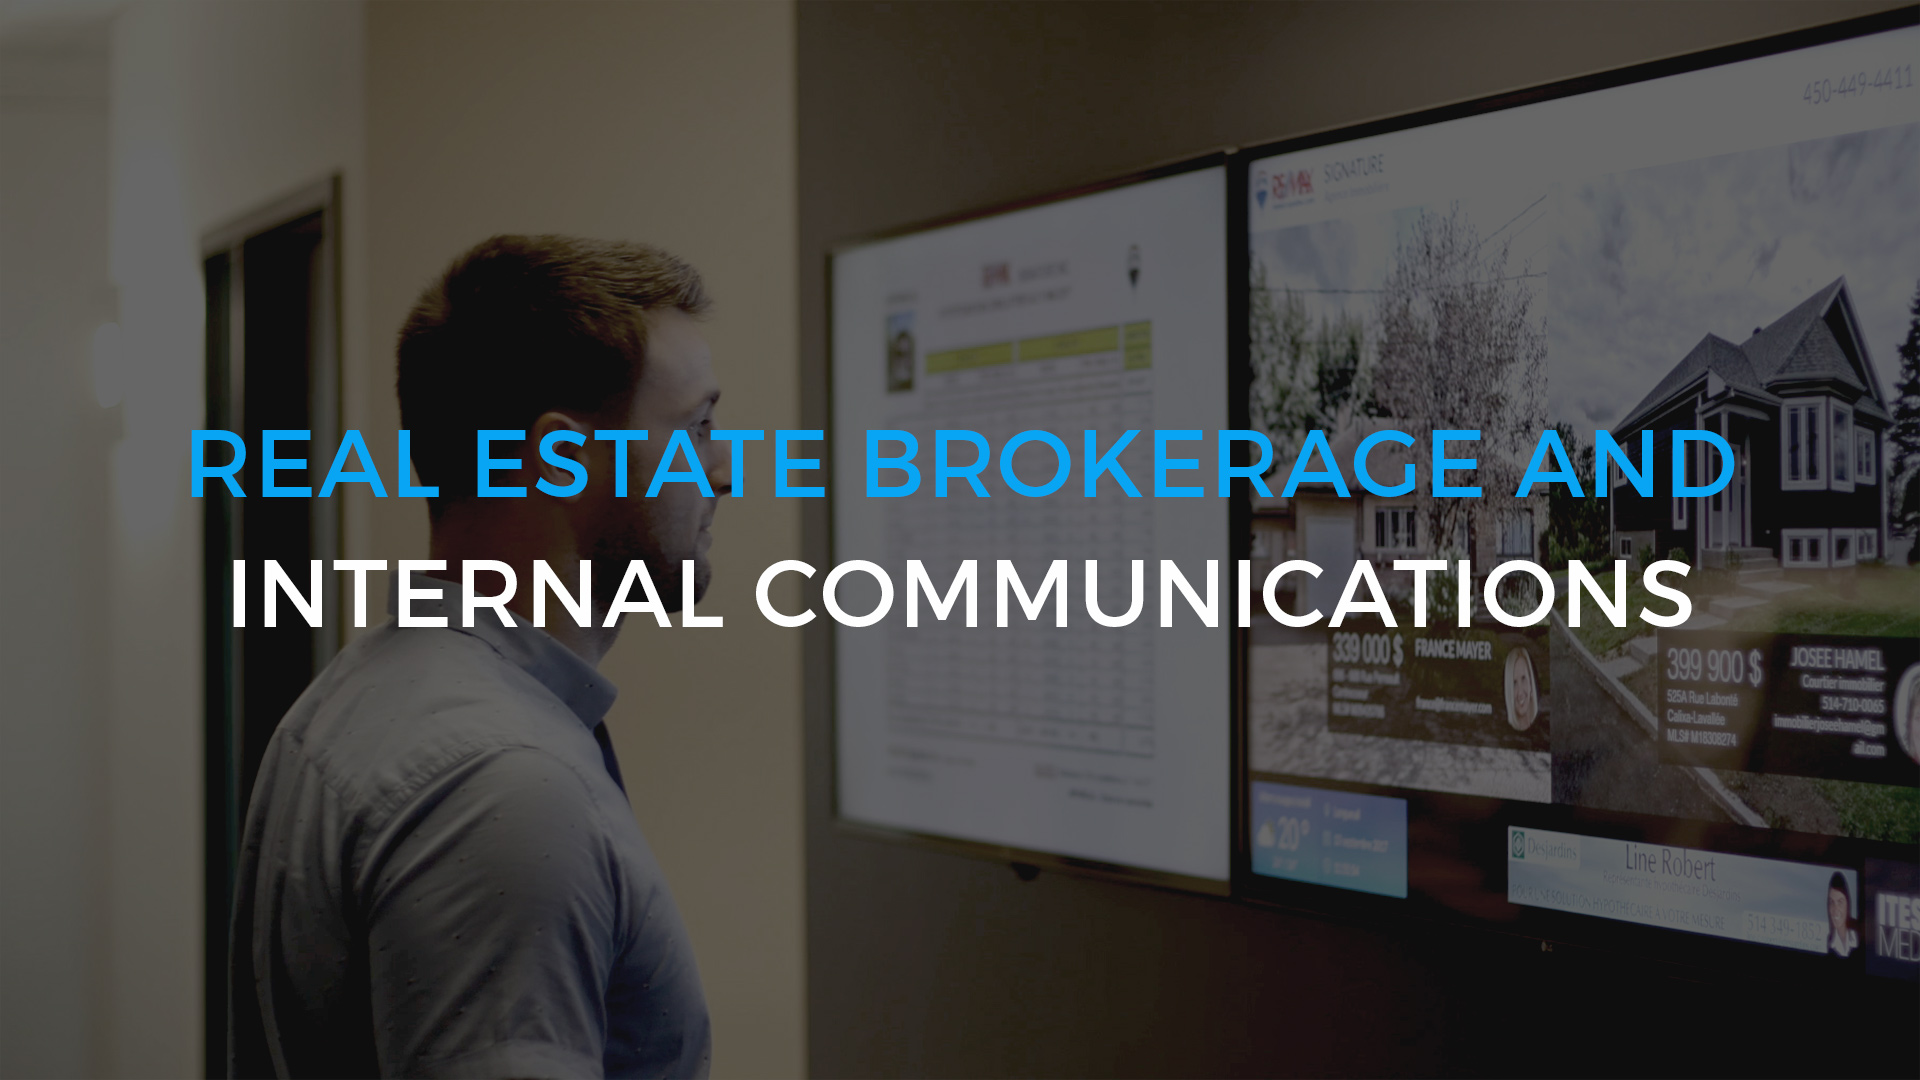 Brokers, Boost Your Internal Communications with Digital Signage